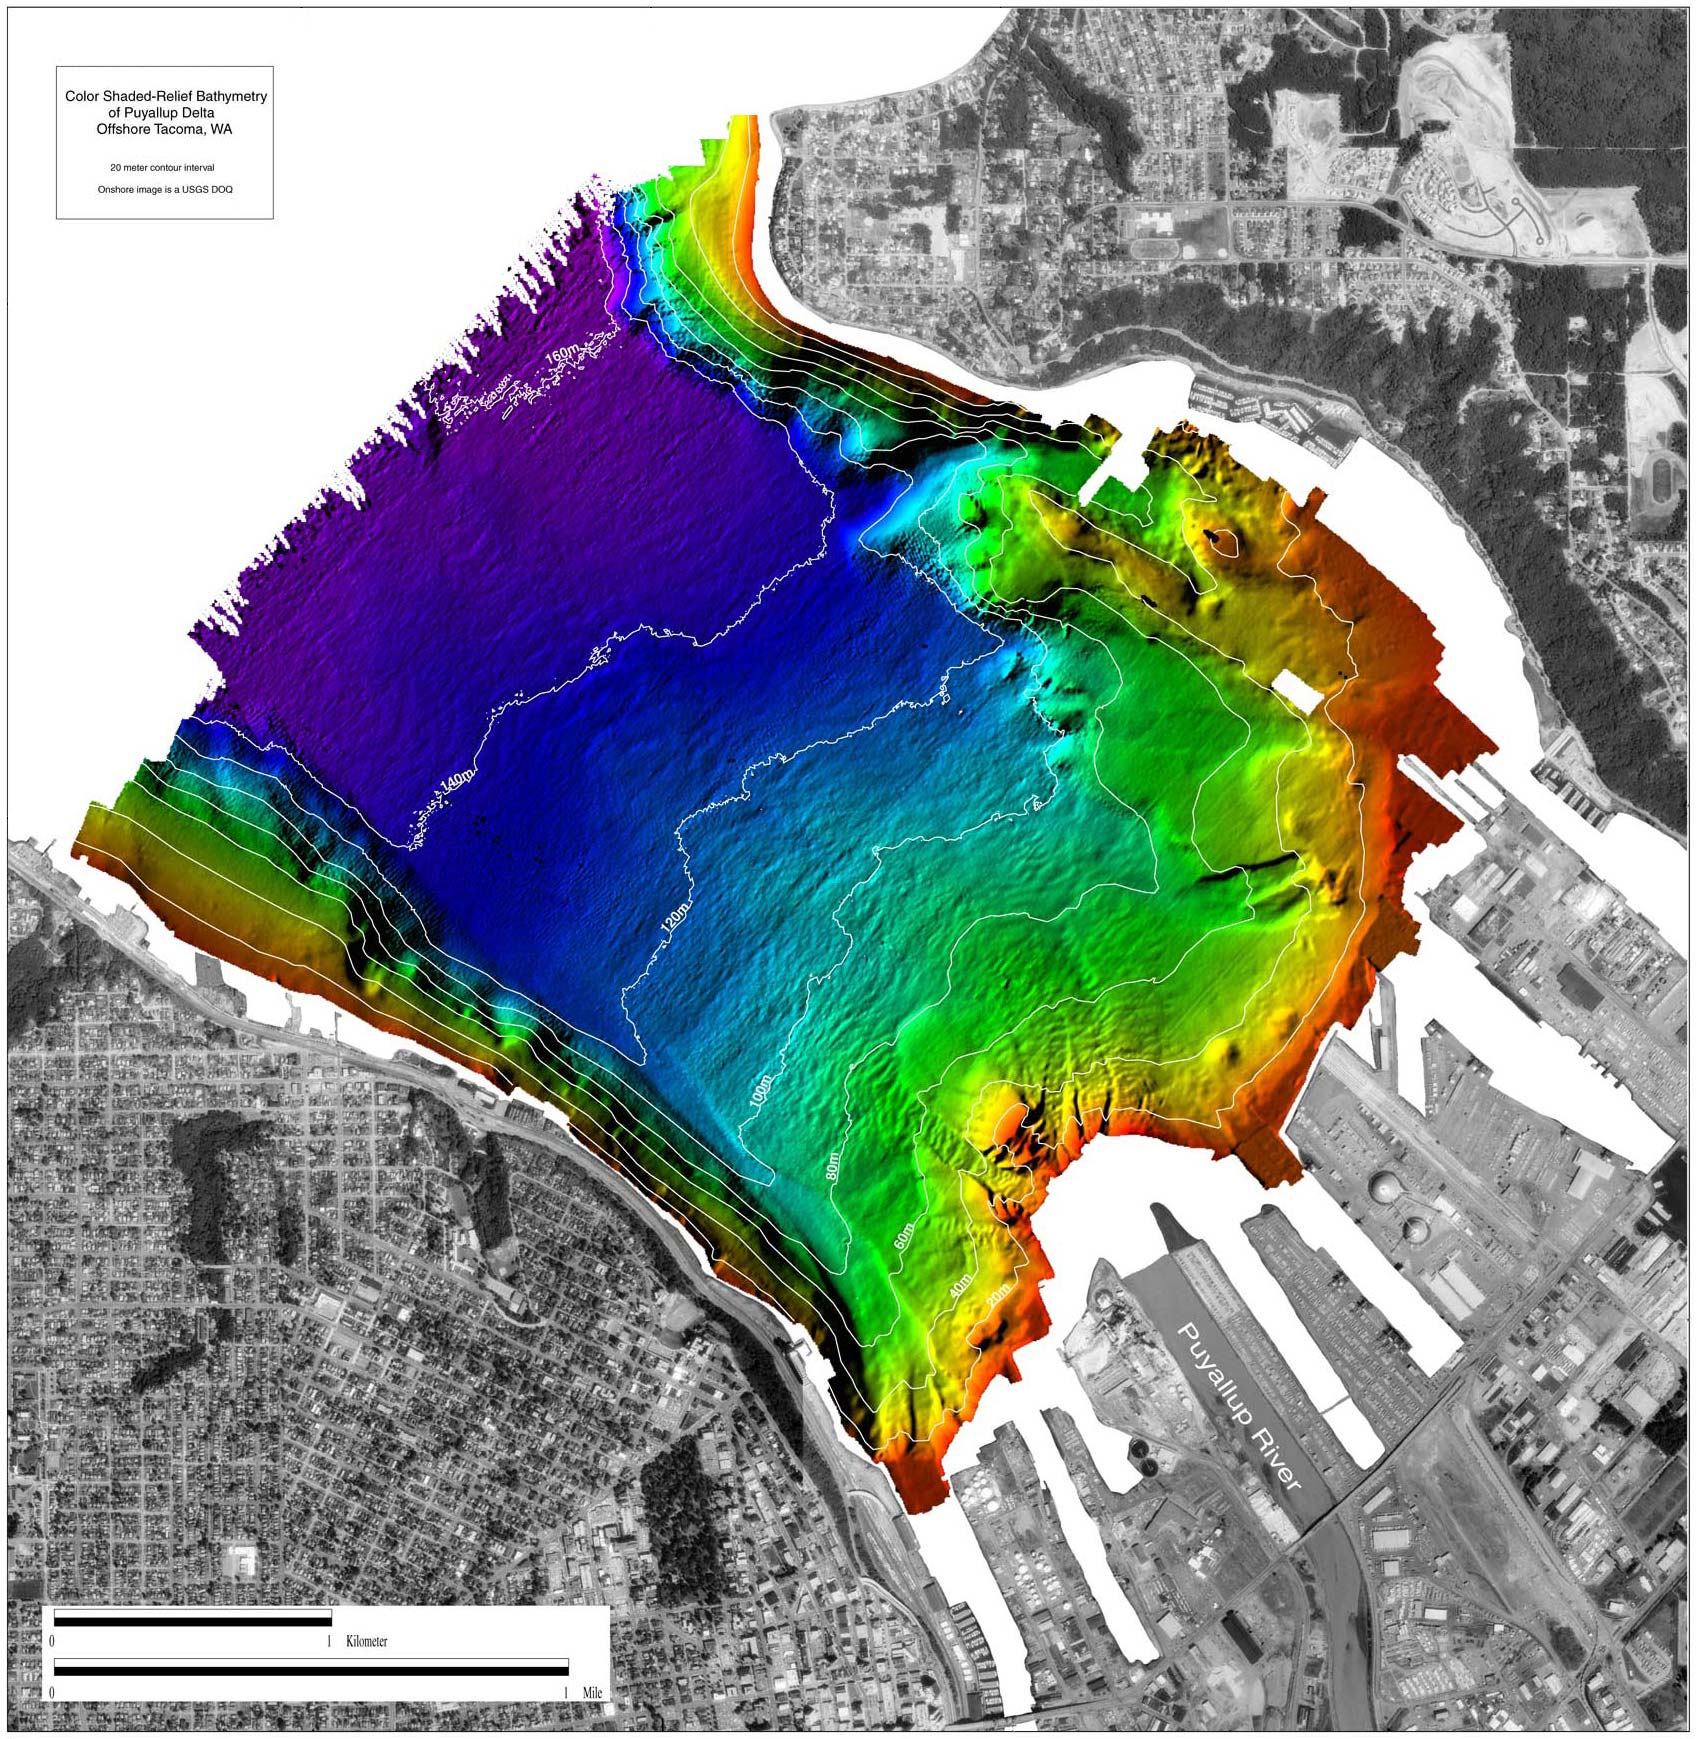 Puyallup delta image, colored shaded-relief bathymetry